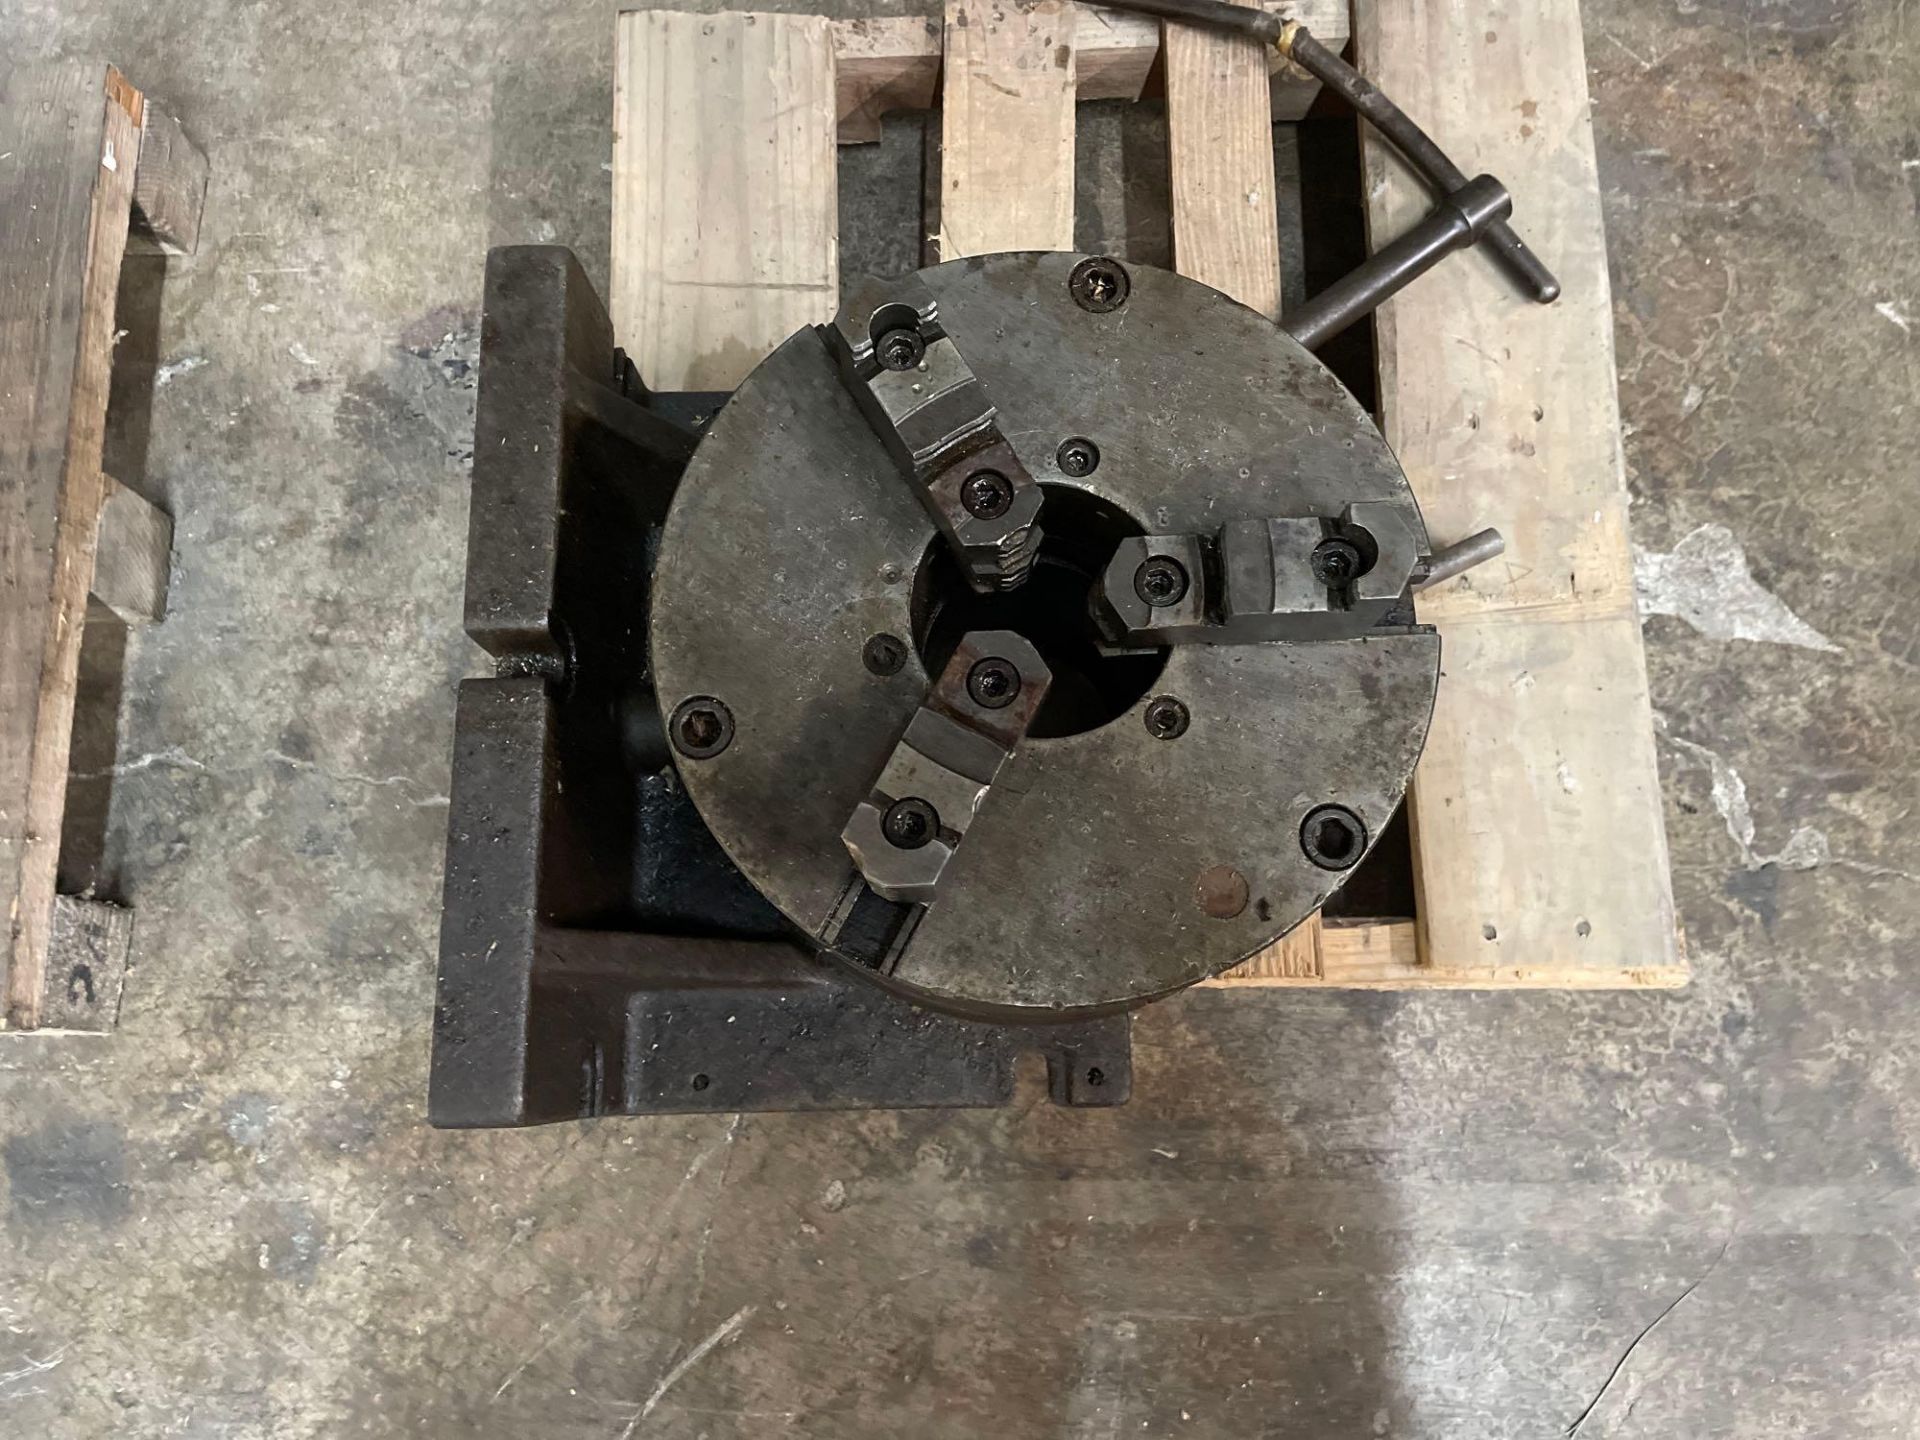 Horizontal and Vertical Mounting Rotary Table 12 1/2” 3 Jaw Chuck with 4” Thru Hole - Image 4 of 4